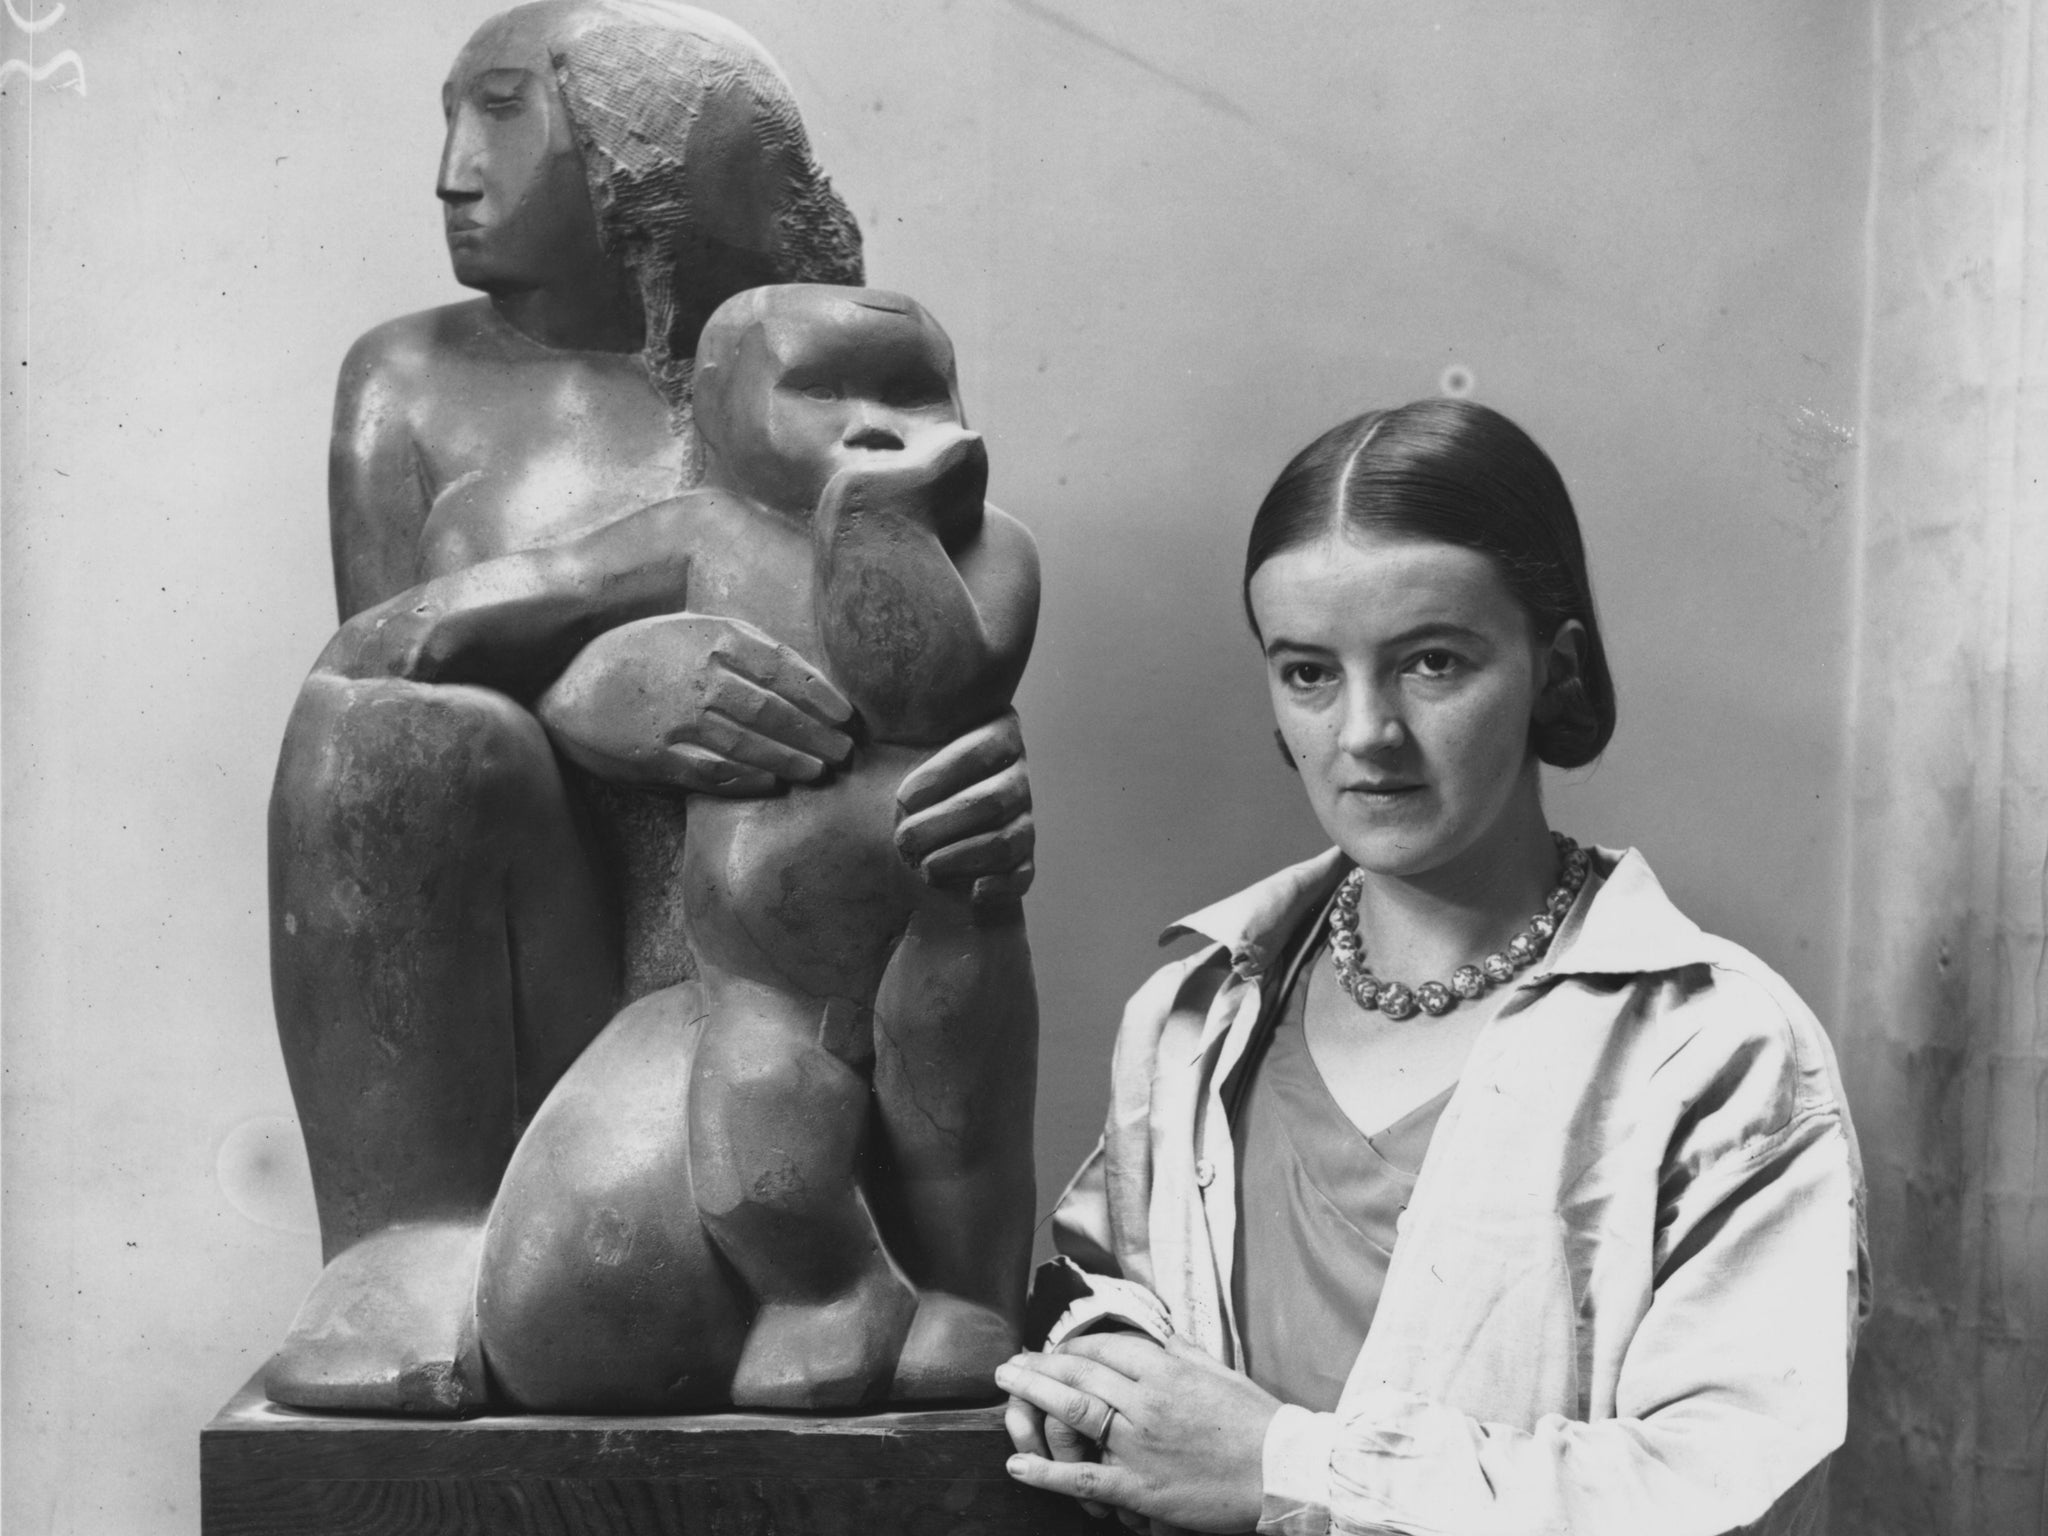 Hepworth with her work ‘Mother and Child’